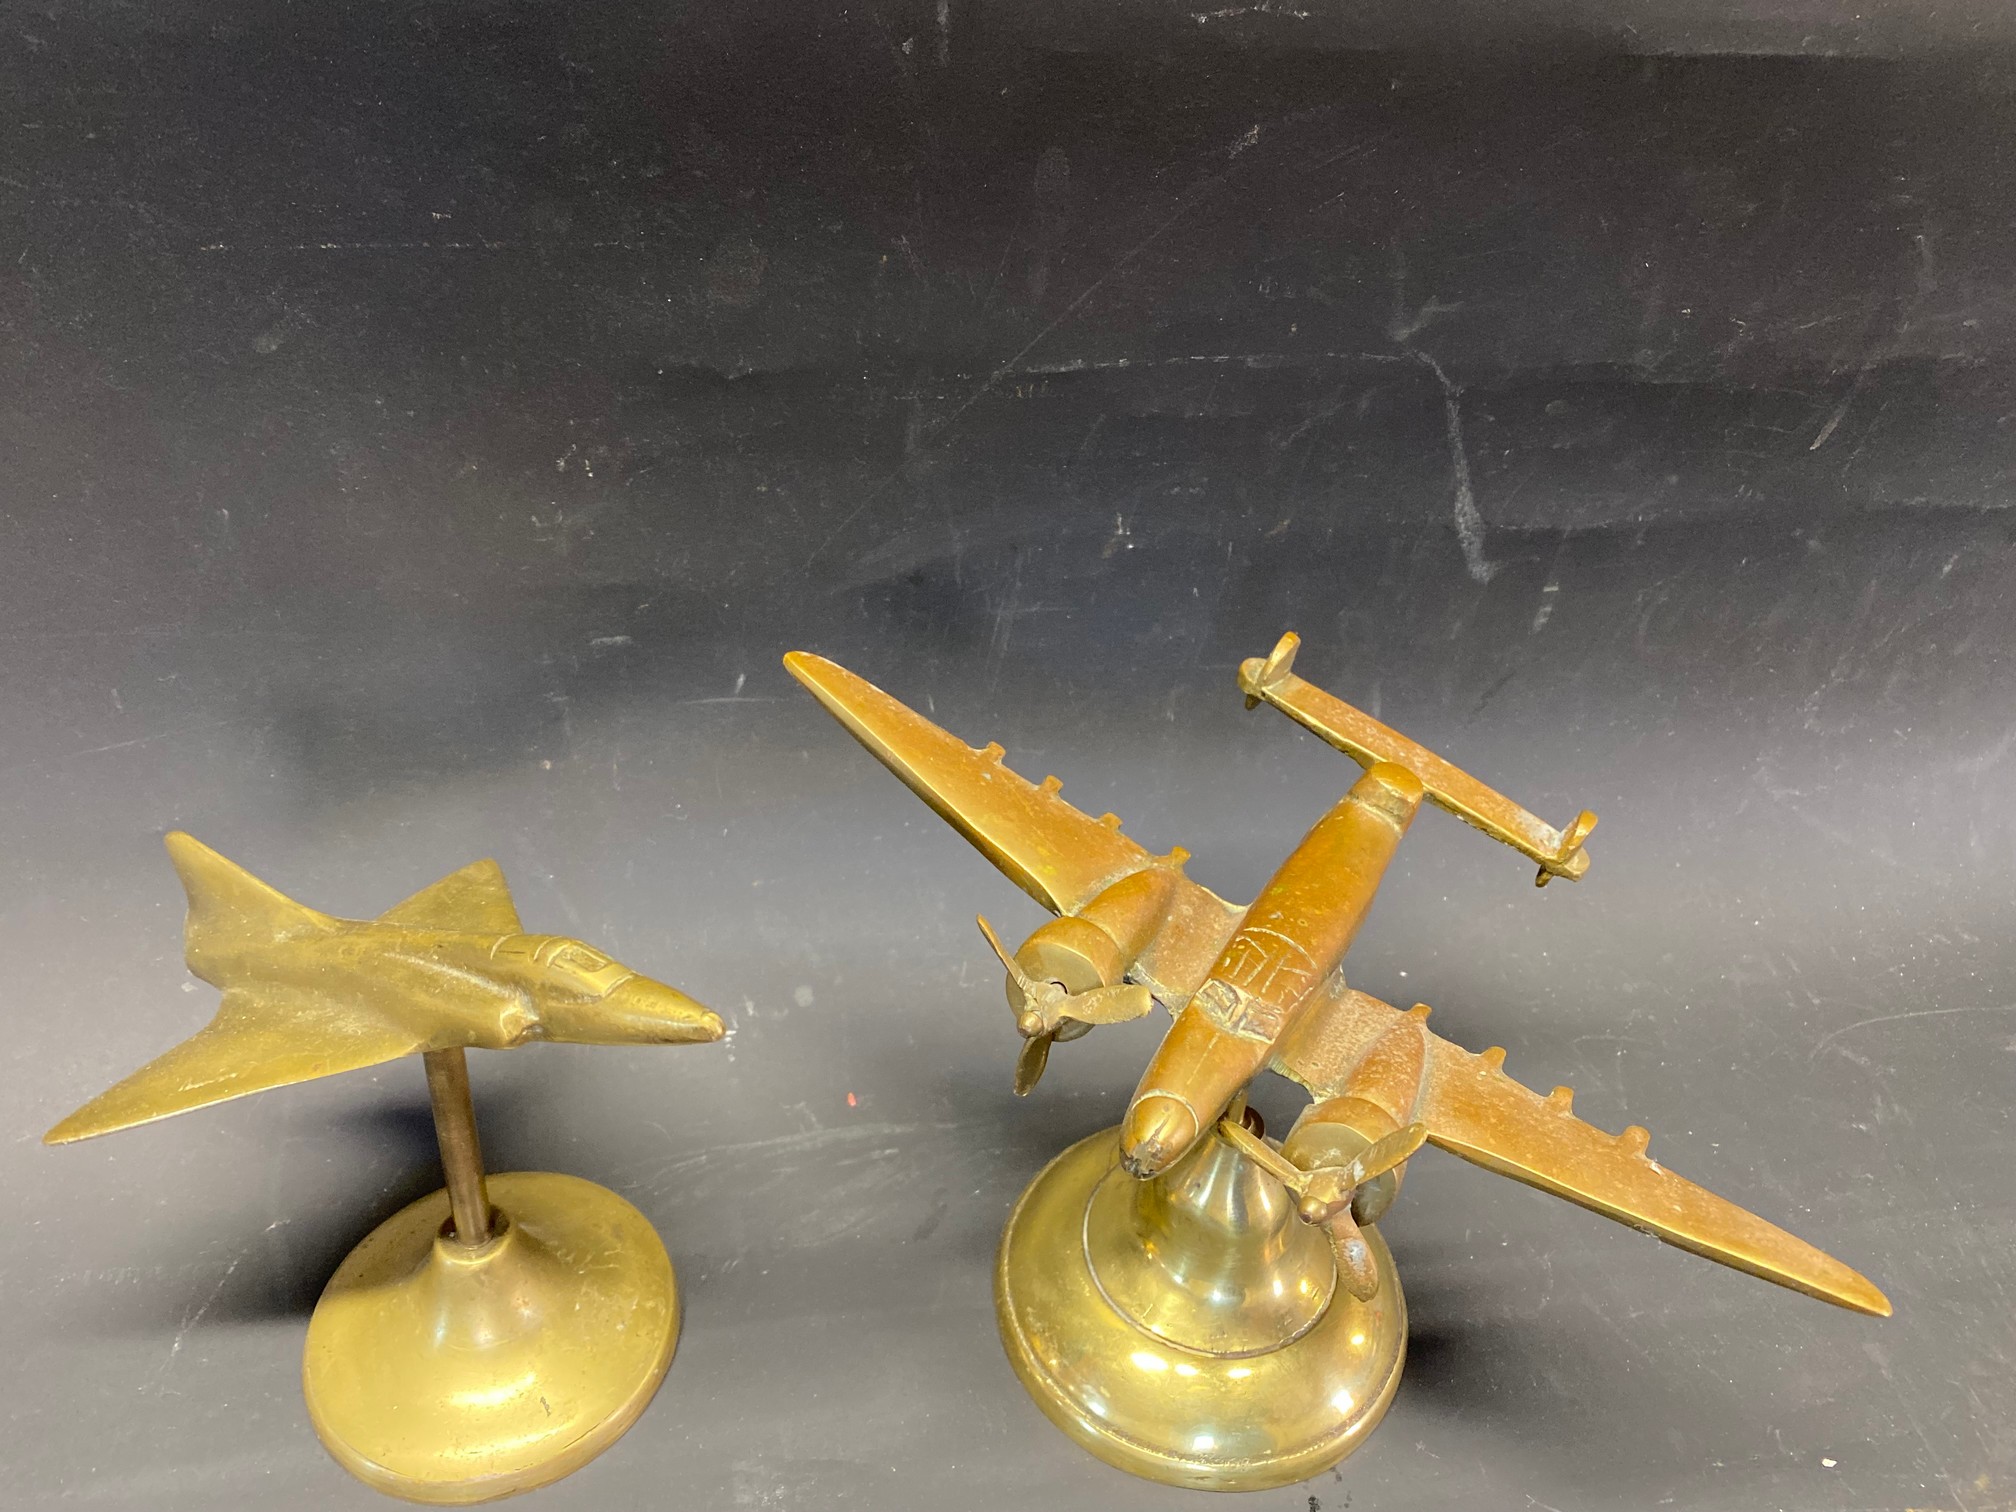 Two mascots/desk pieces the form of a brass aeroplanes, a Lockheed Hudson and a Delta winged jet.